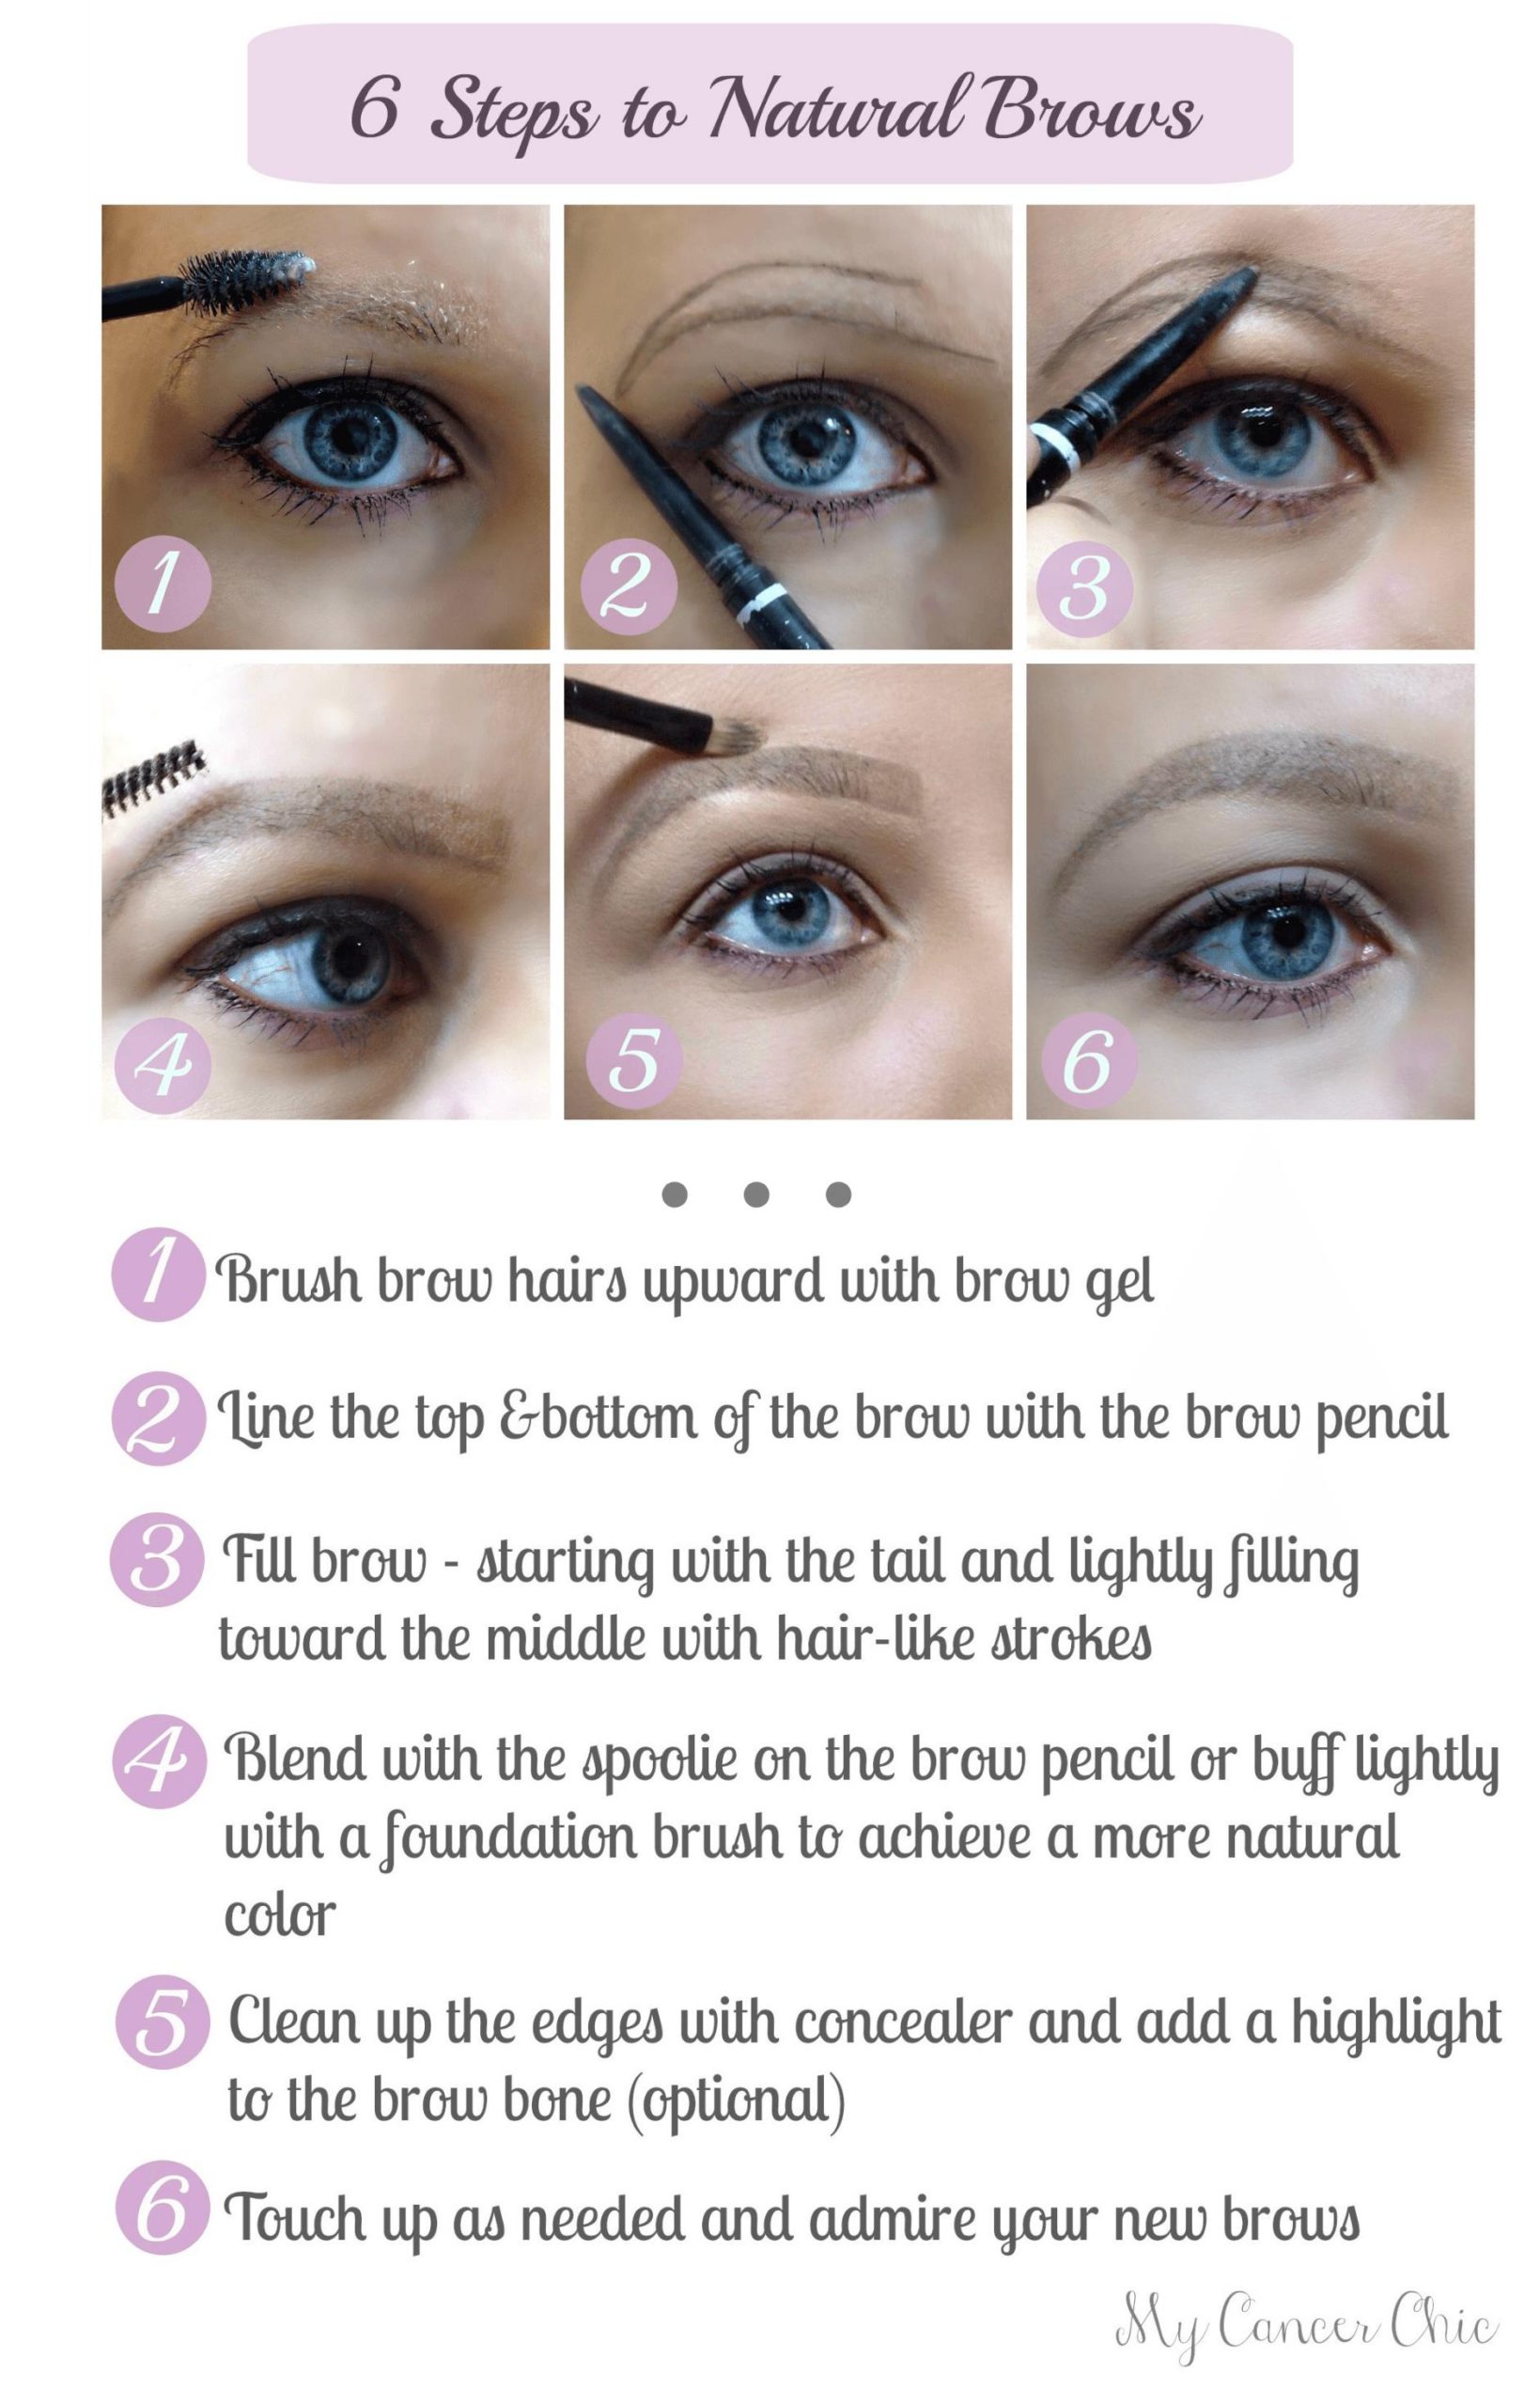 6 steps to Create Natural Eyebrows During Cancer